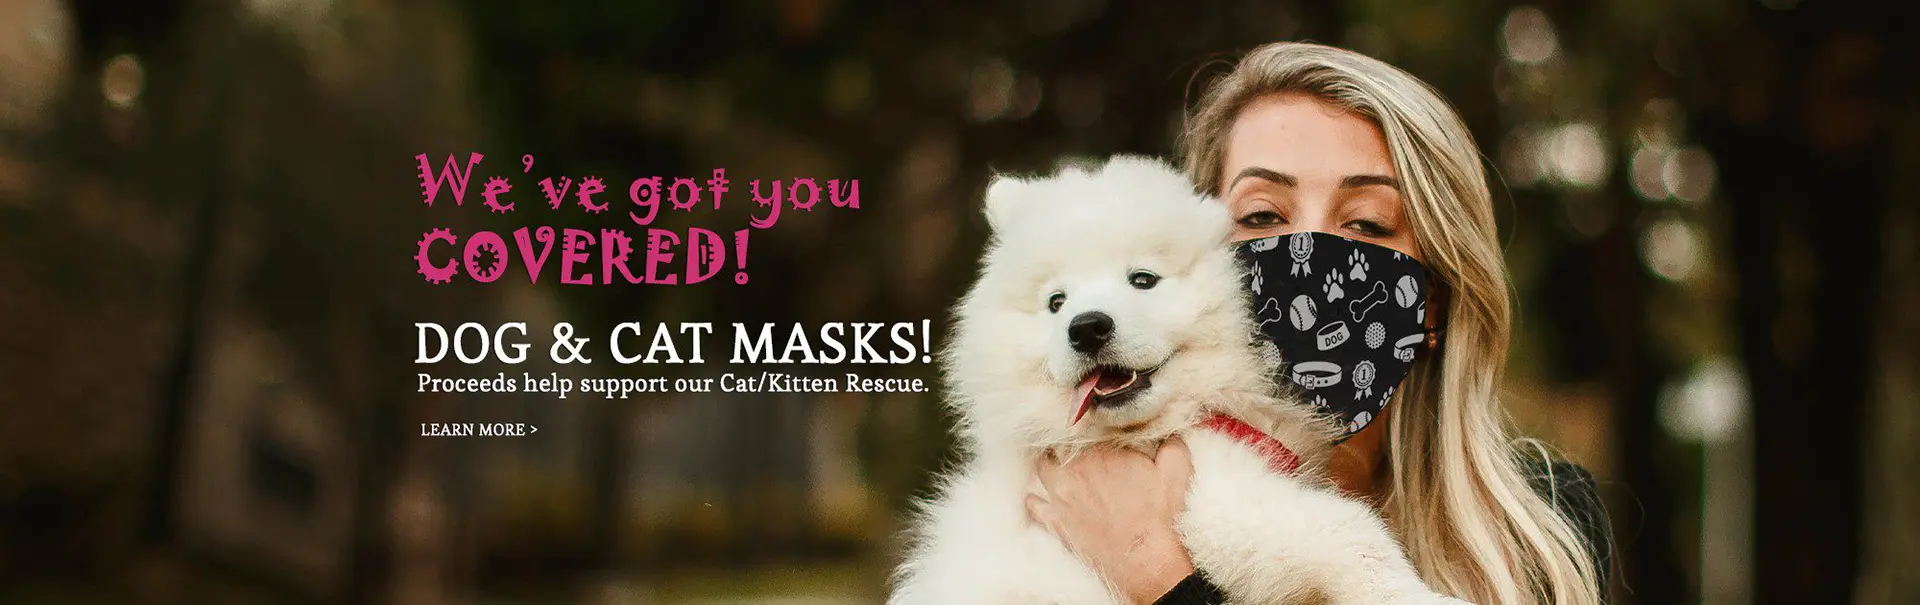 We've got you covered! Dog & cat masks! Proceeds help support our Cat/Kitten rescue.